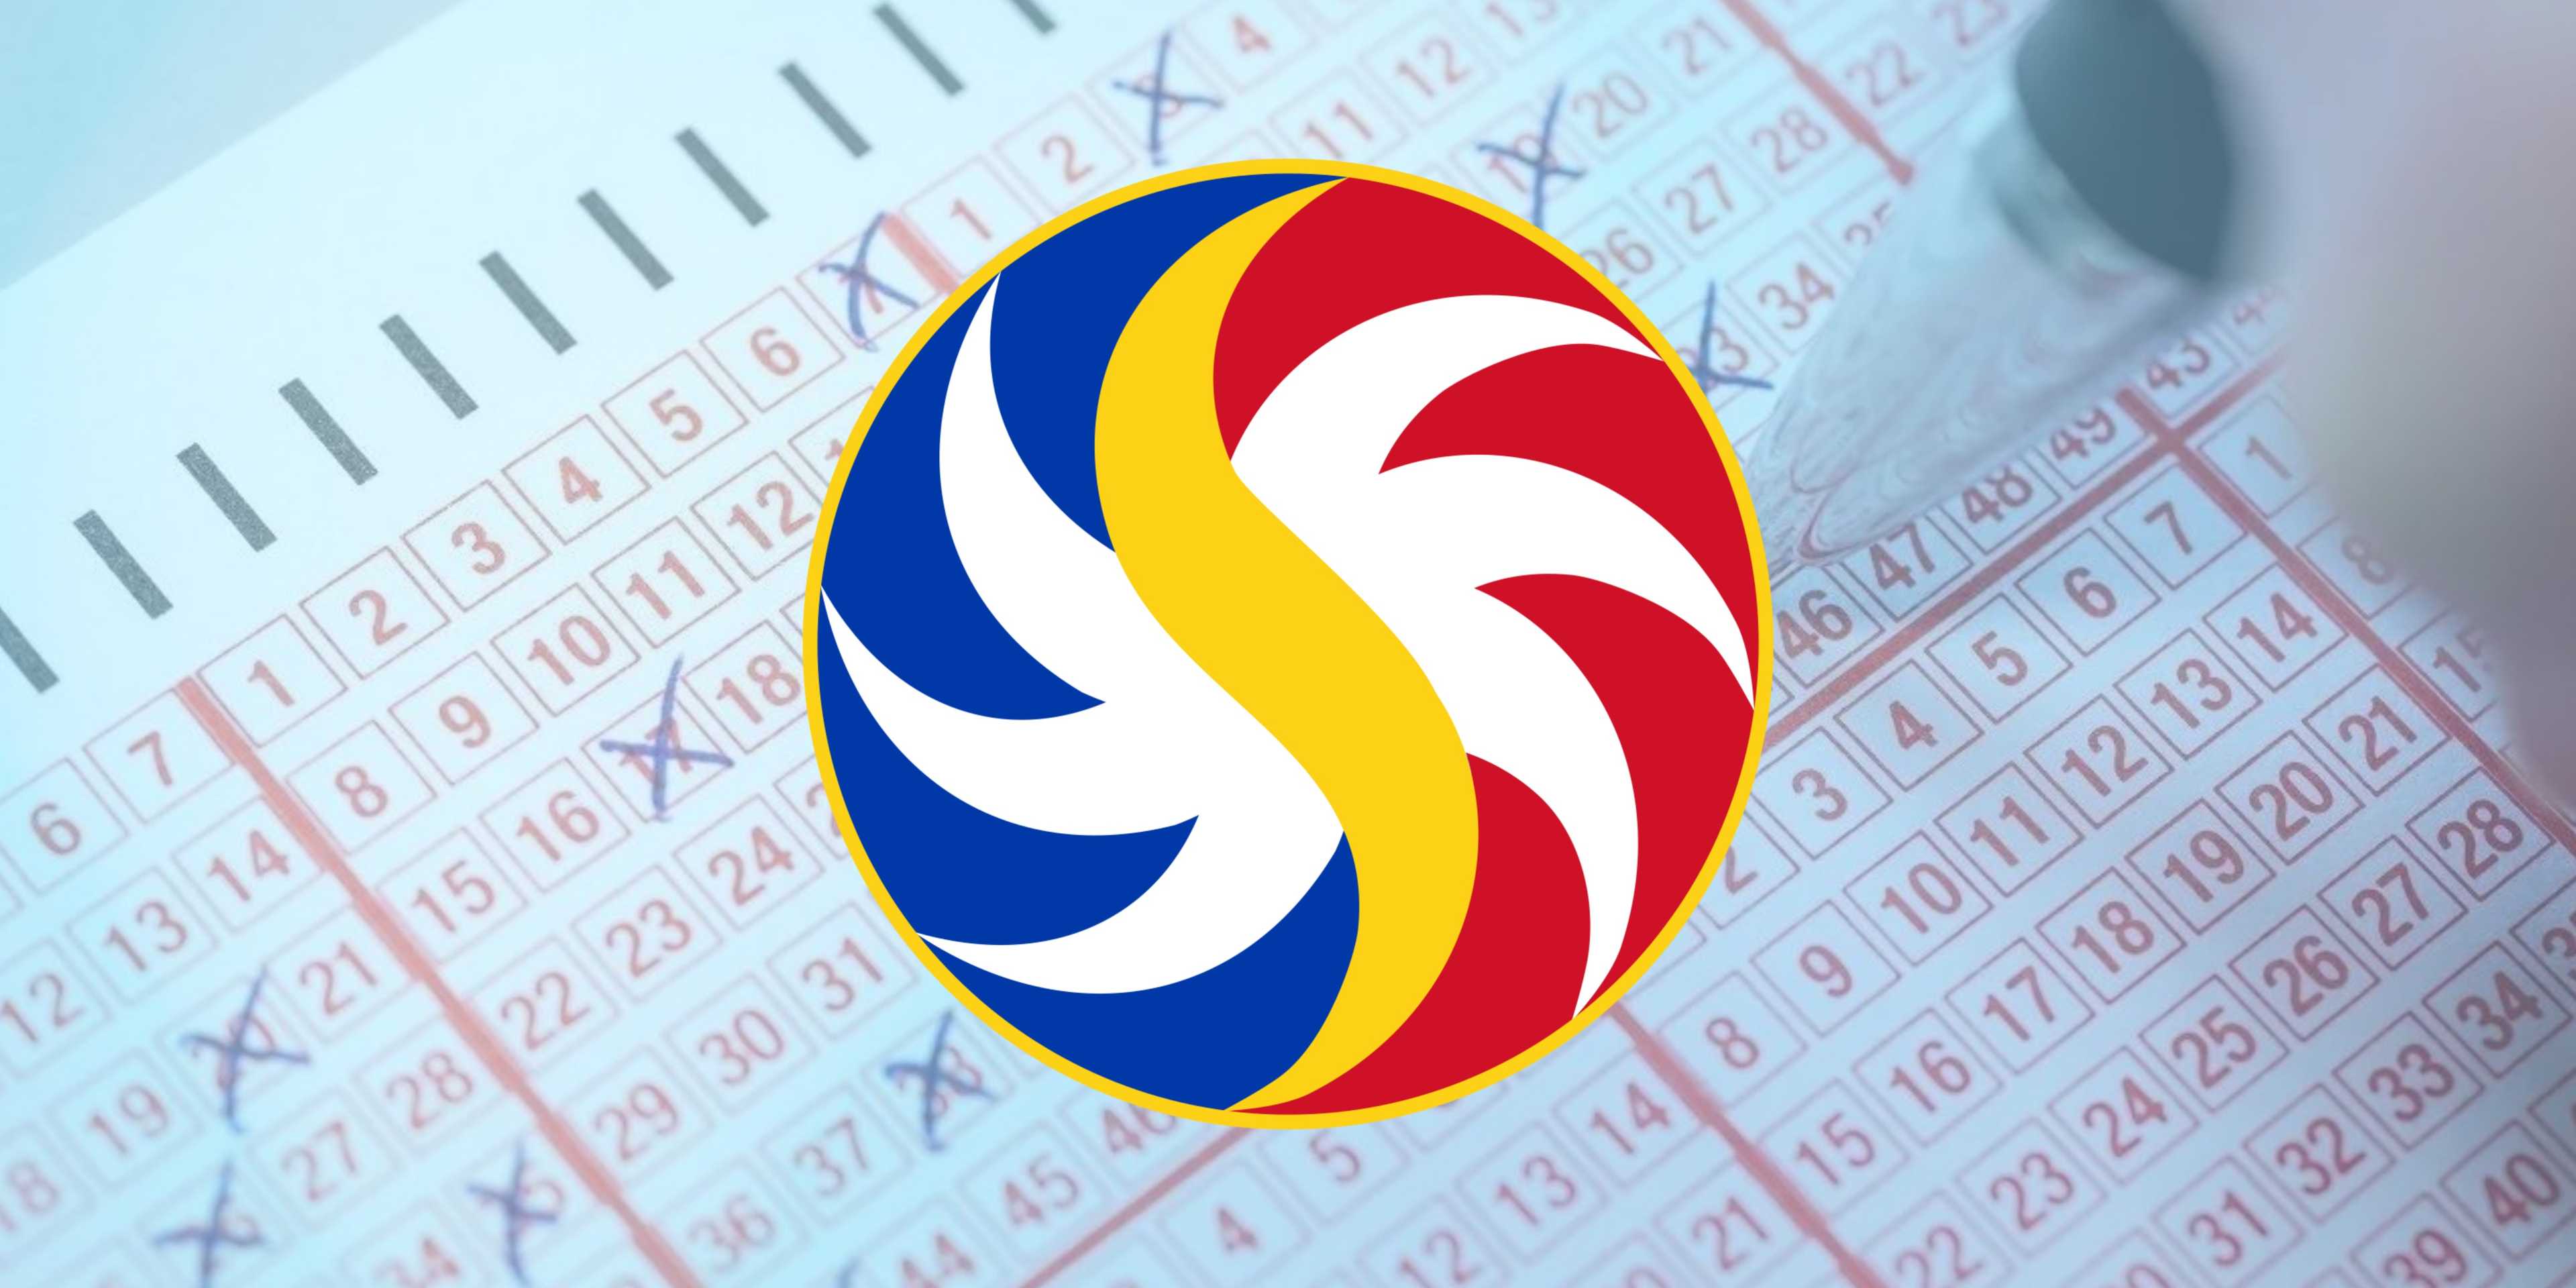 PCSO Lotto Draw Results on Tuesday, February 13